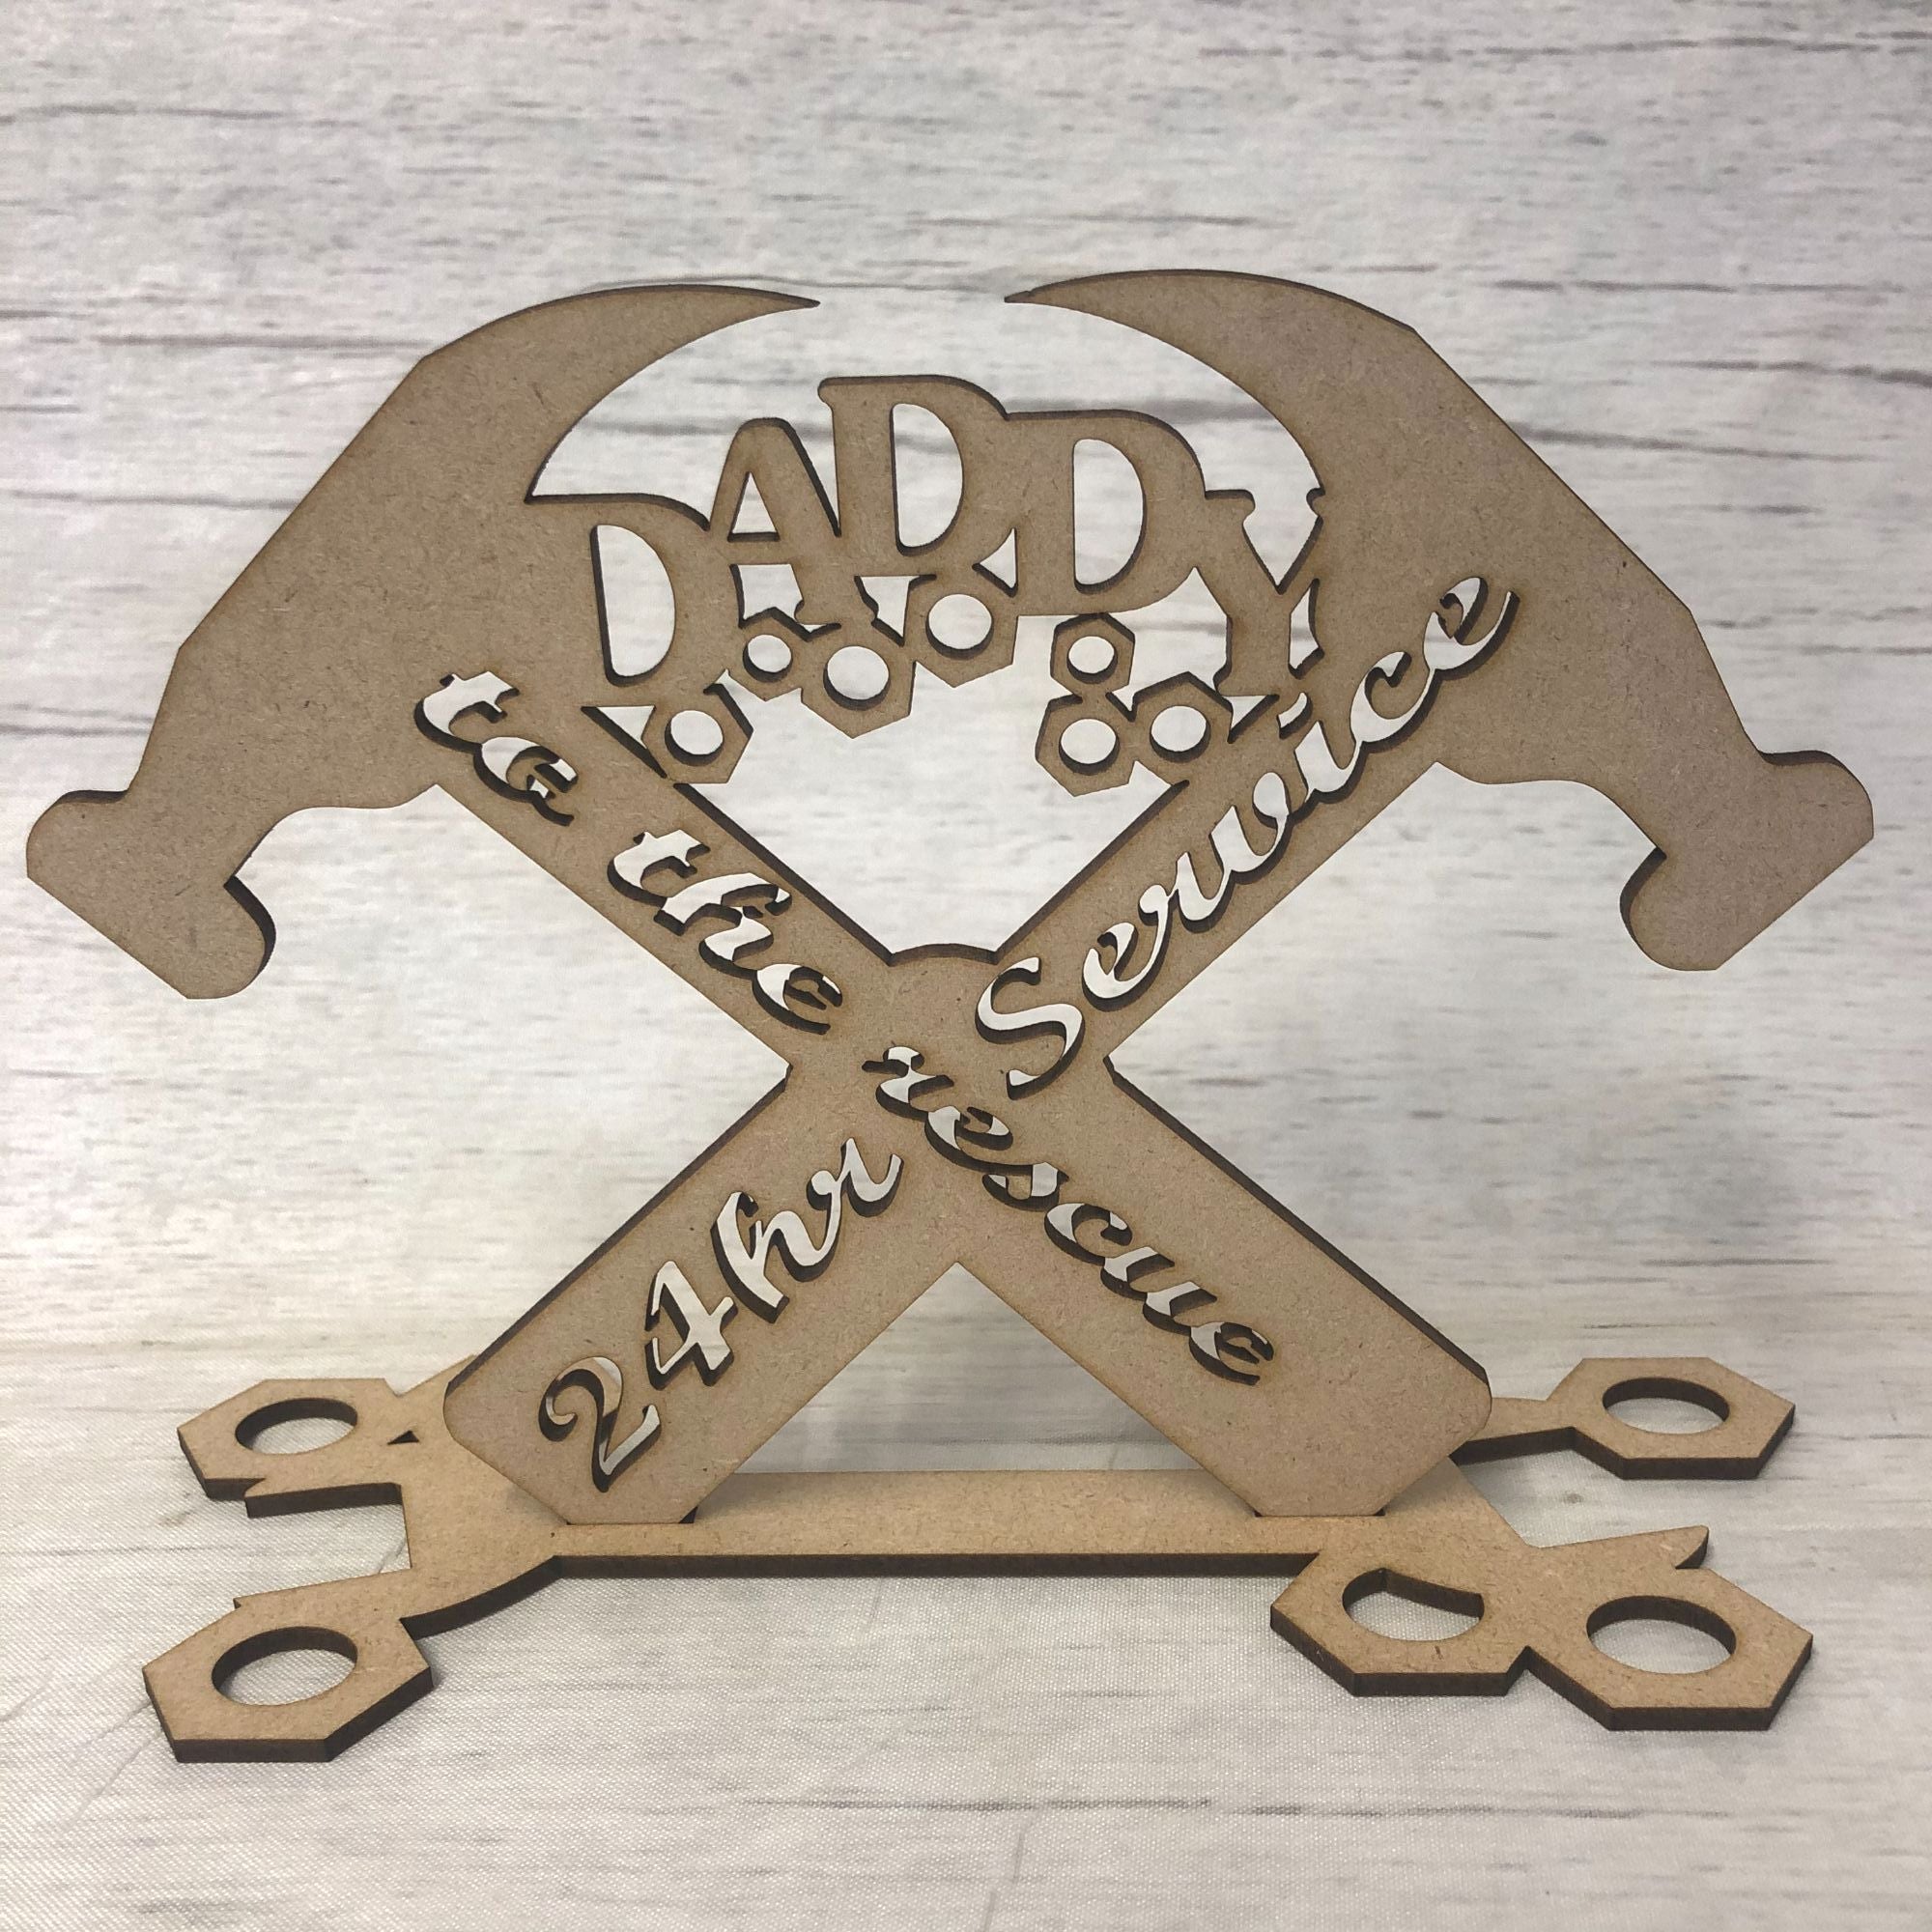 Base MDF - Daddy to the rescue Hammer